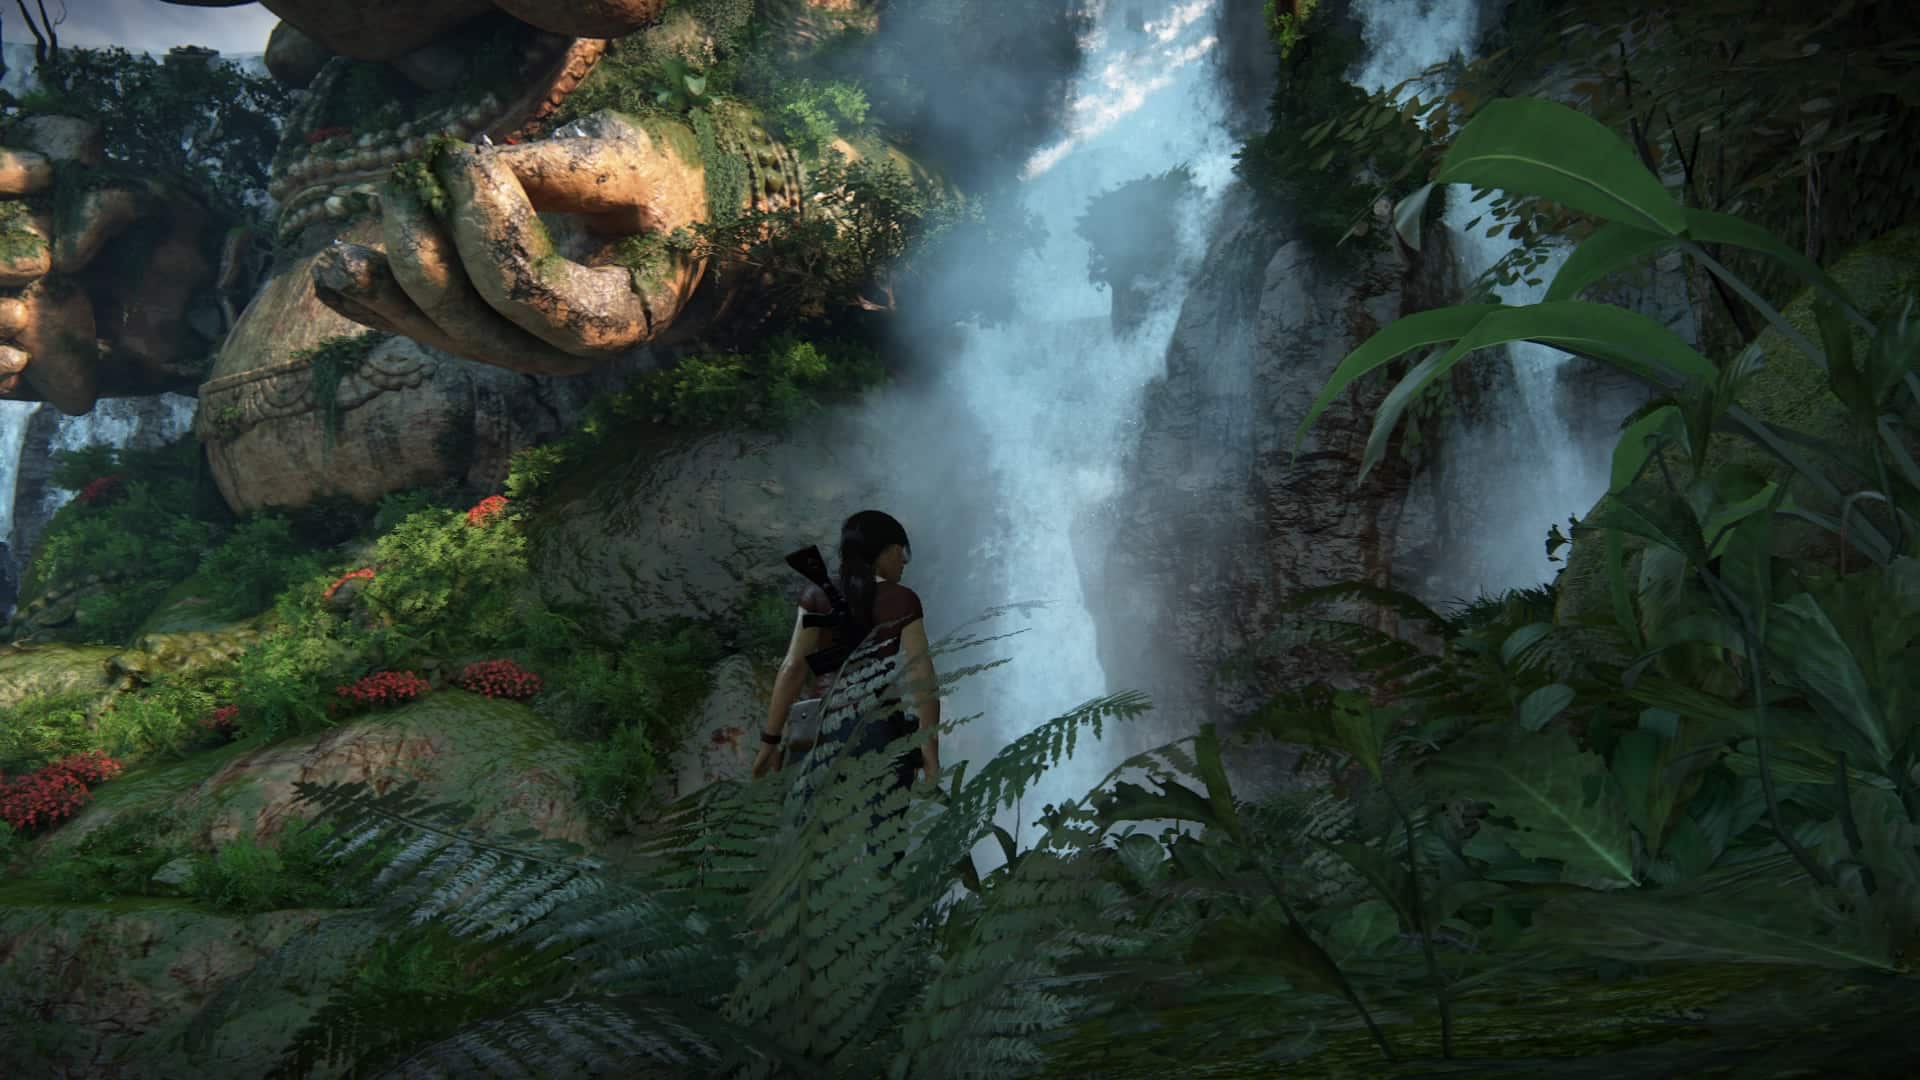 Nature is very alive in Uncharted: The Lost Legacy